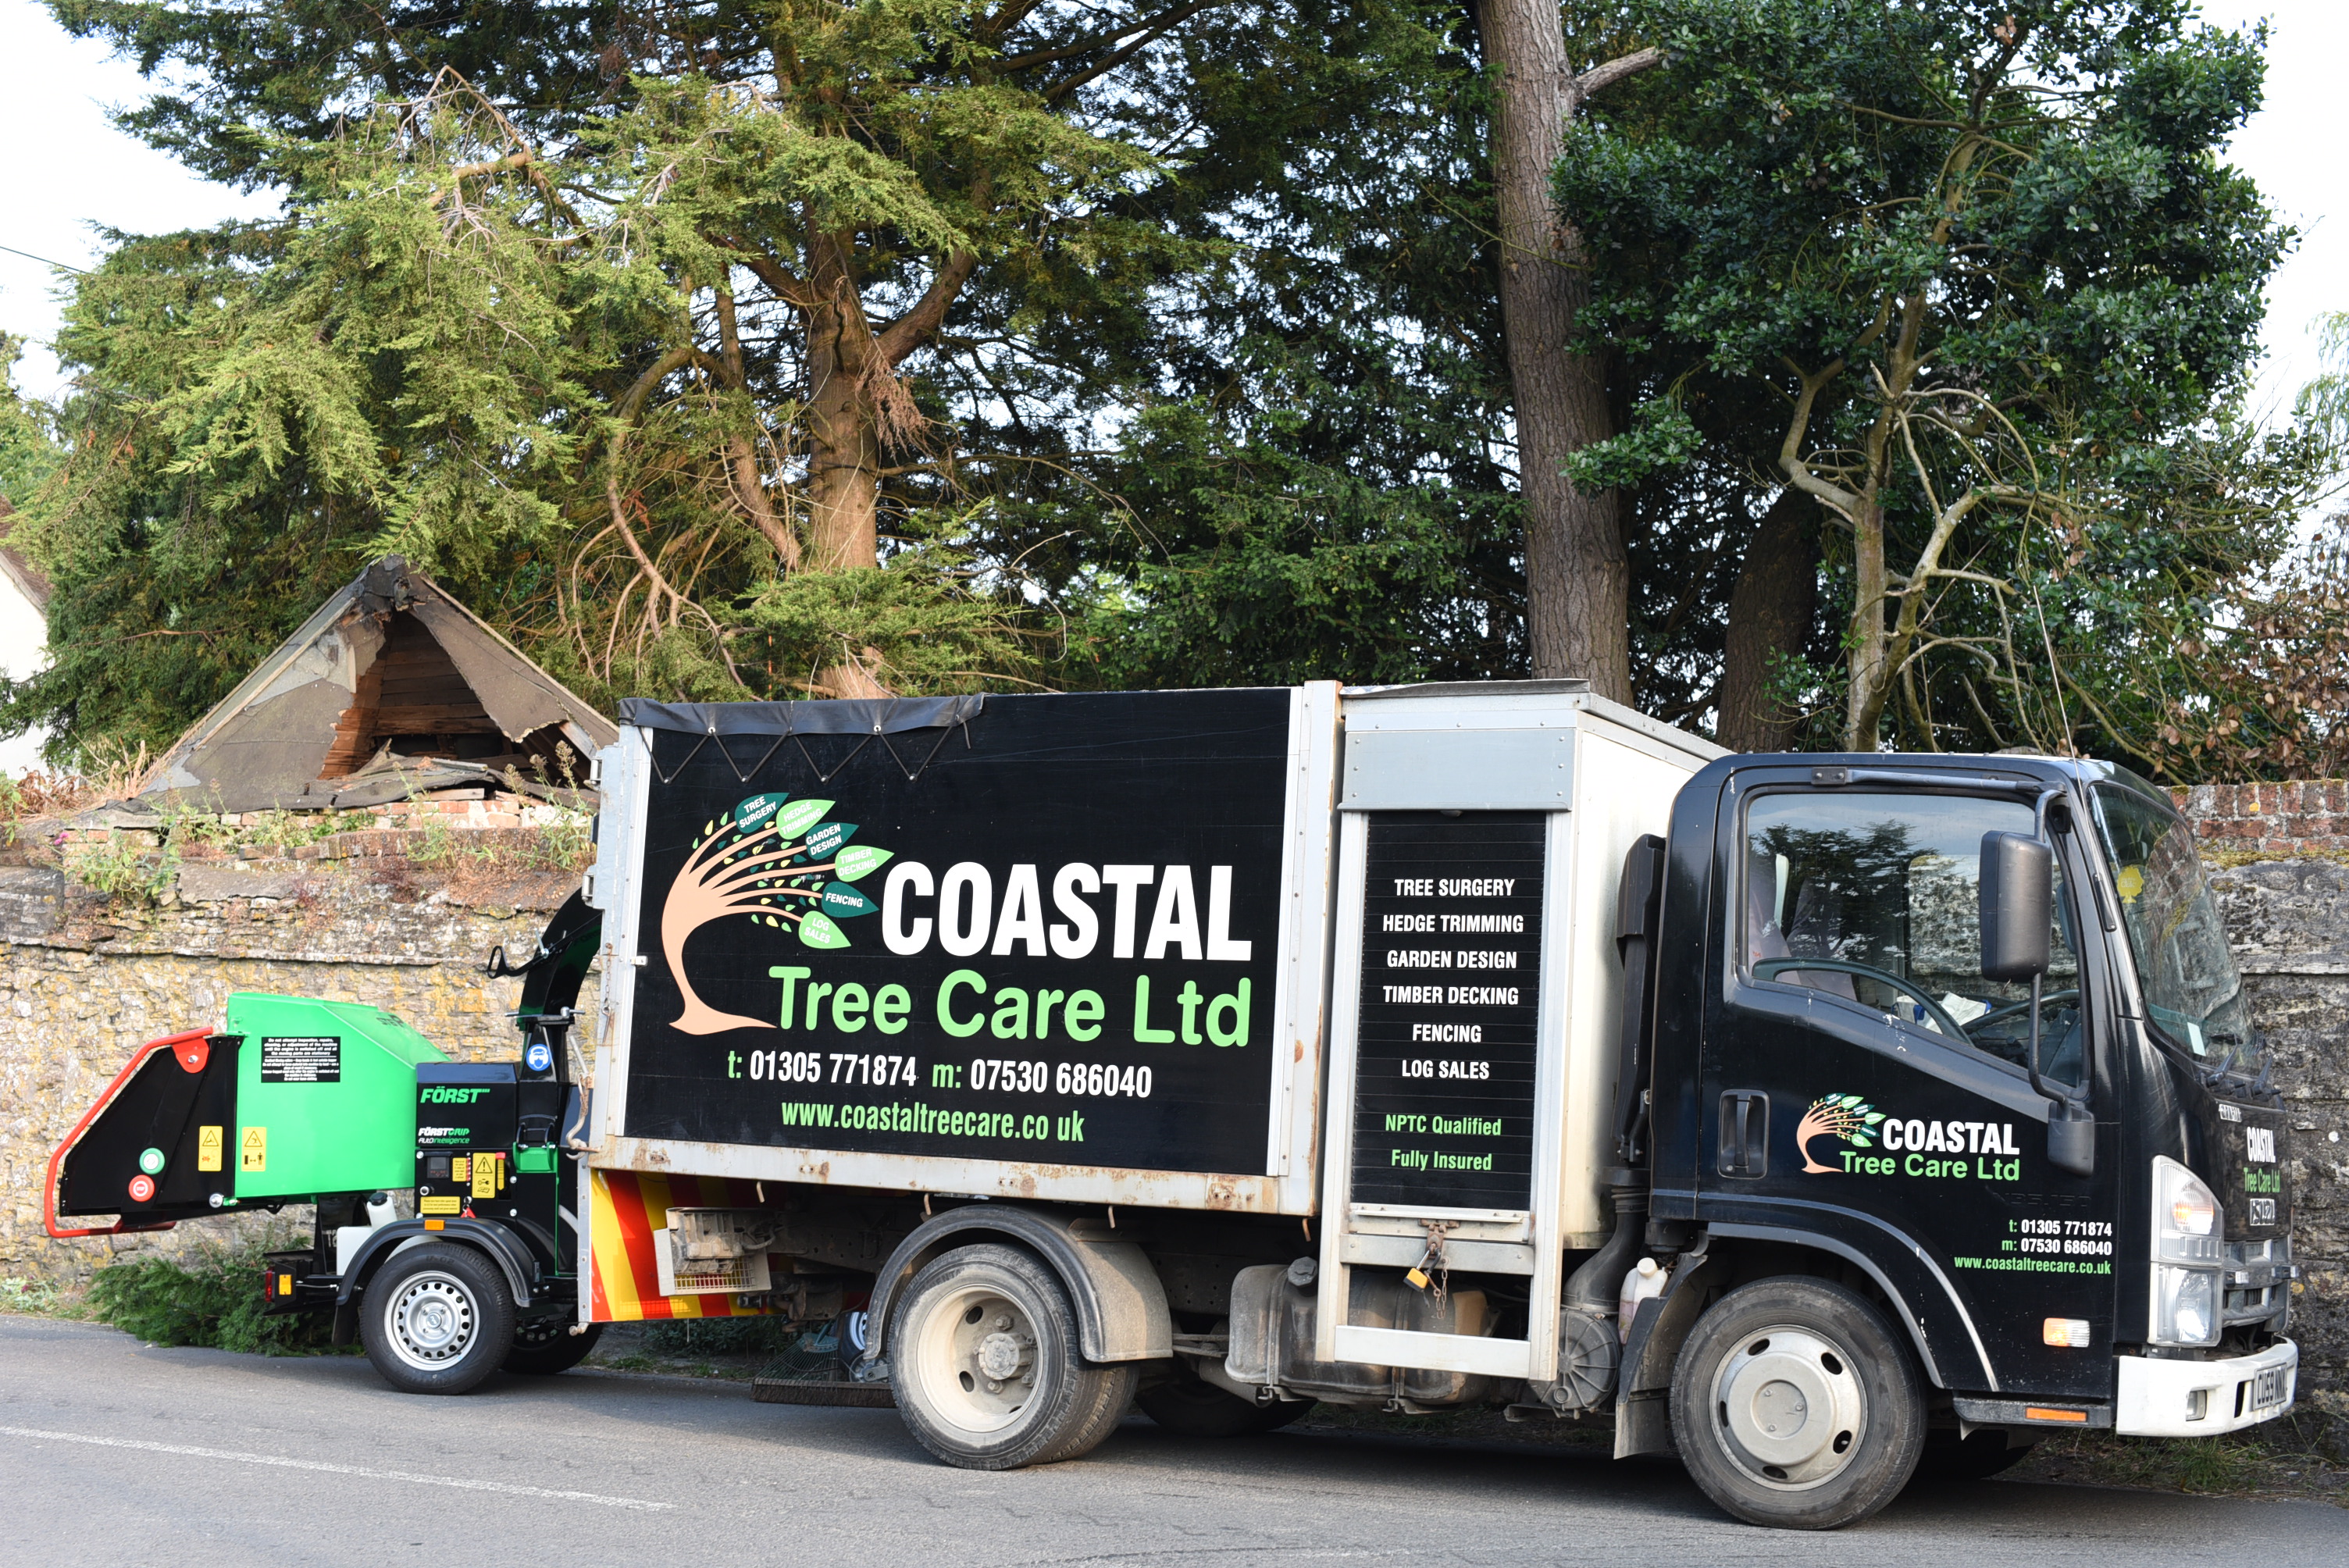 about us, tools of the trade, Weymouth tree surgeon, tree surgeon Weymouth, Coastal Tree Care Ltd, Dorchester tree surgery, Dorchester tree surgeon, Dorchester tree surgeons,